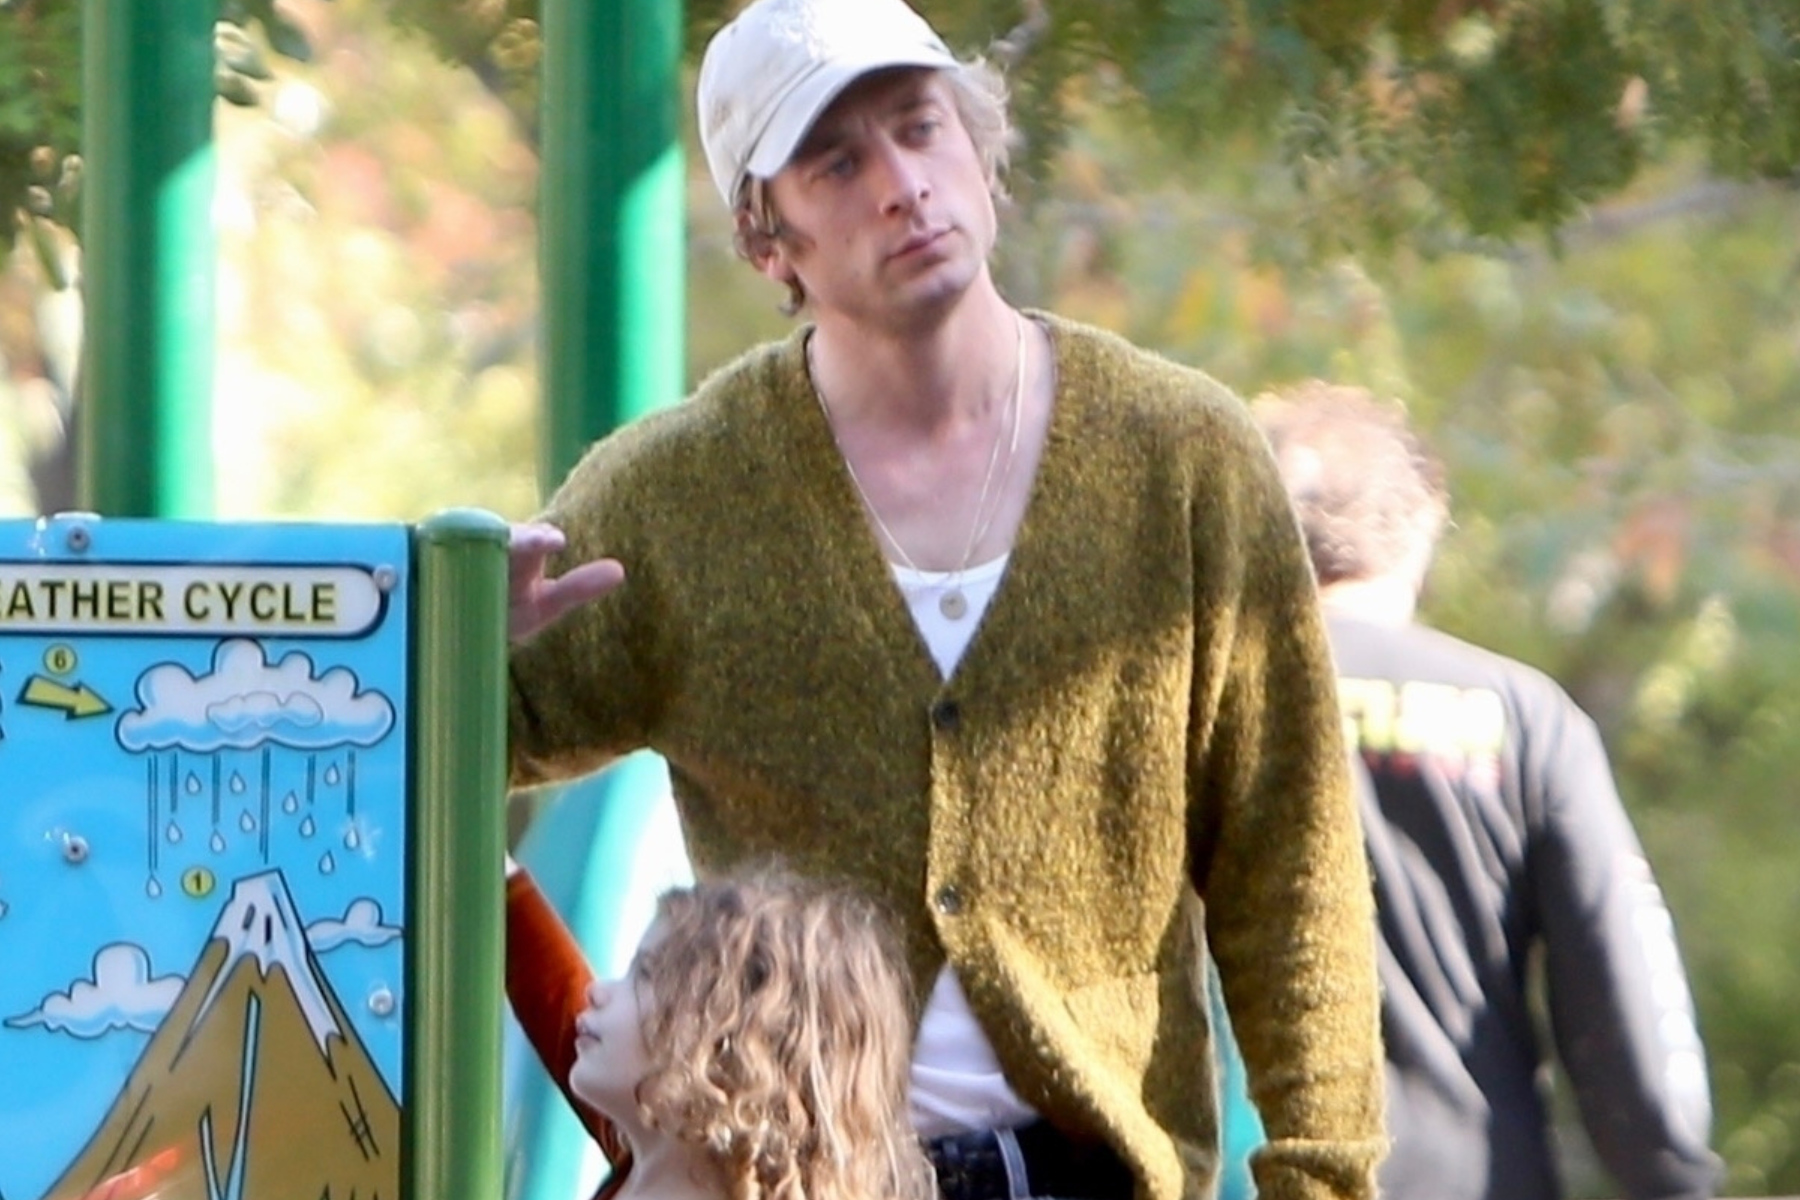 Embracing the calm after Thanksgiving, Jeremy Allen White was seen delighting in a day out at the park with his children. Dressed in a cozy olive cardigan, white top, and blue jeans, topped off with a cap and sneakers, he fully immersed himself in the joy of playtime with his kids.